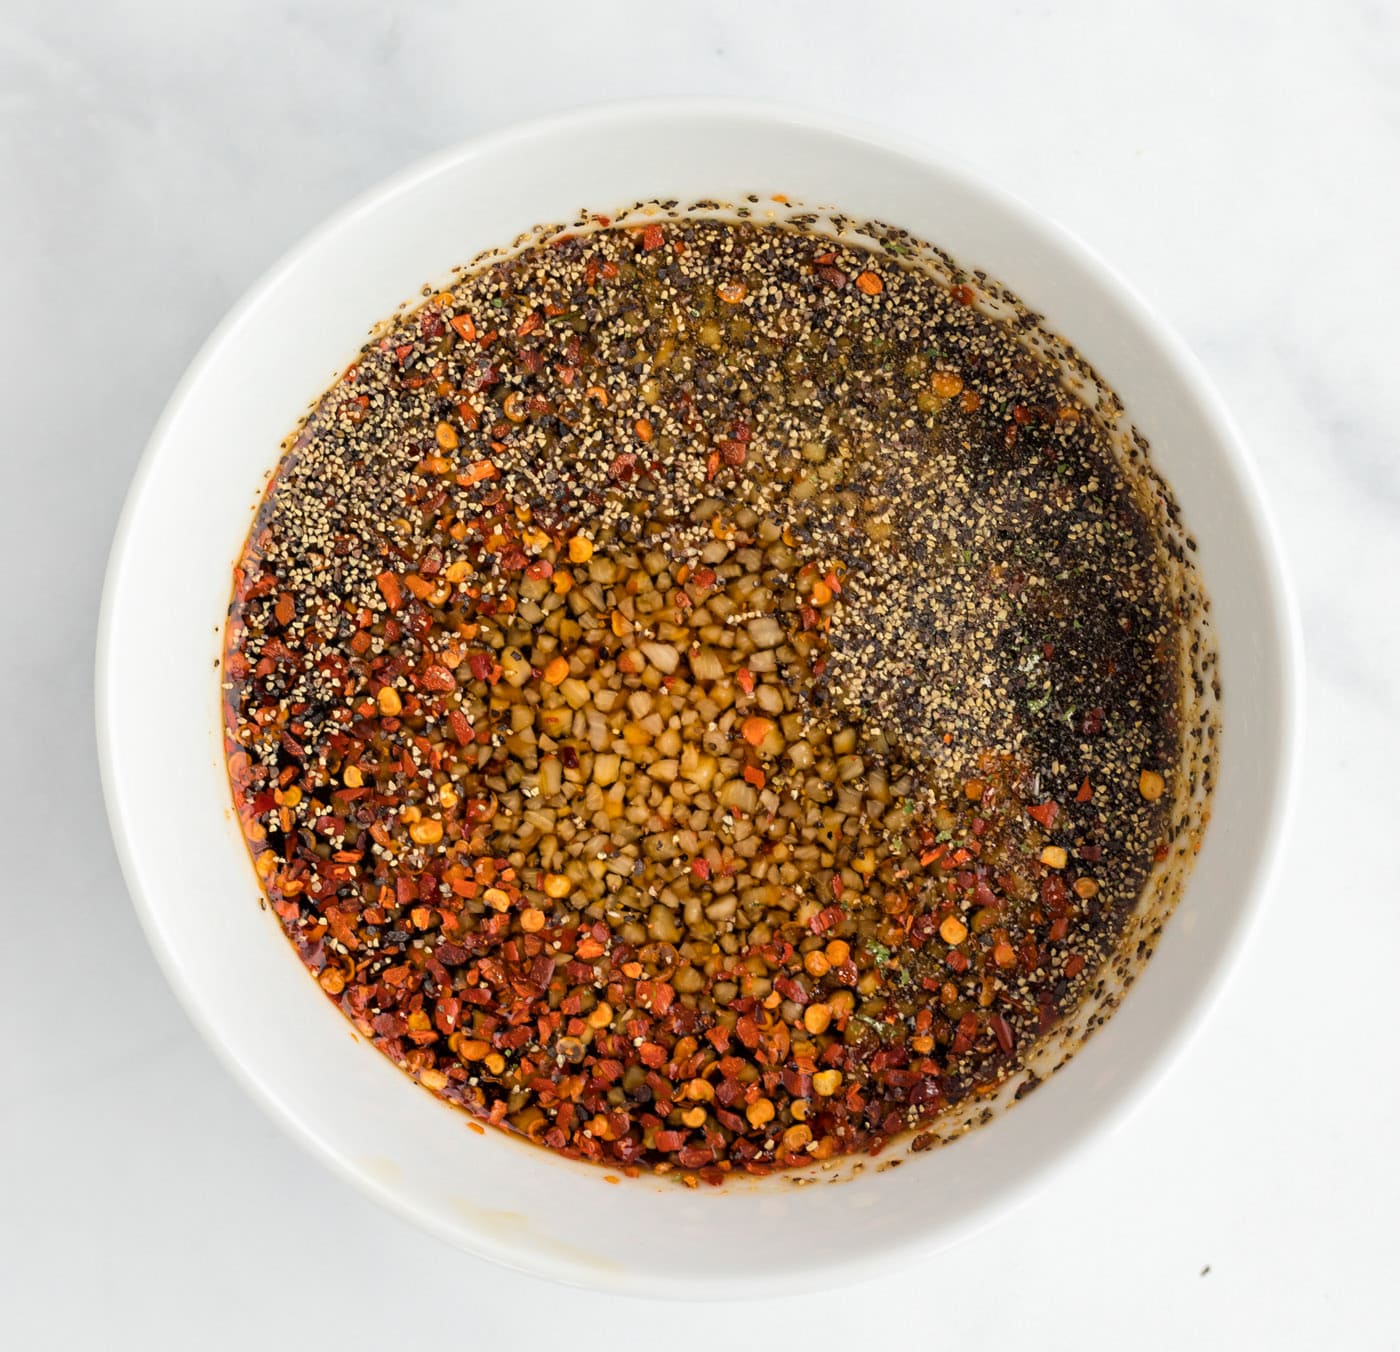 maple soy marinade for salmon